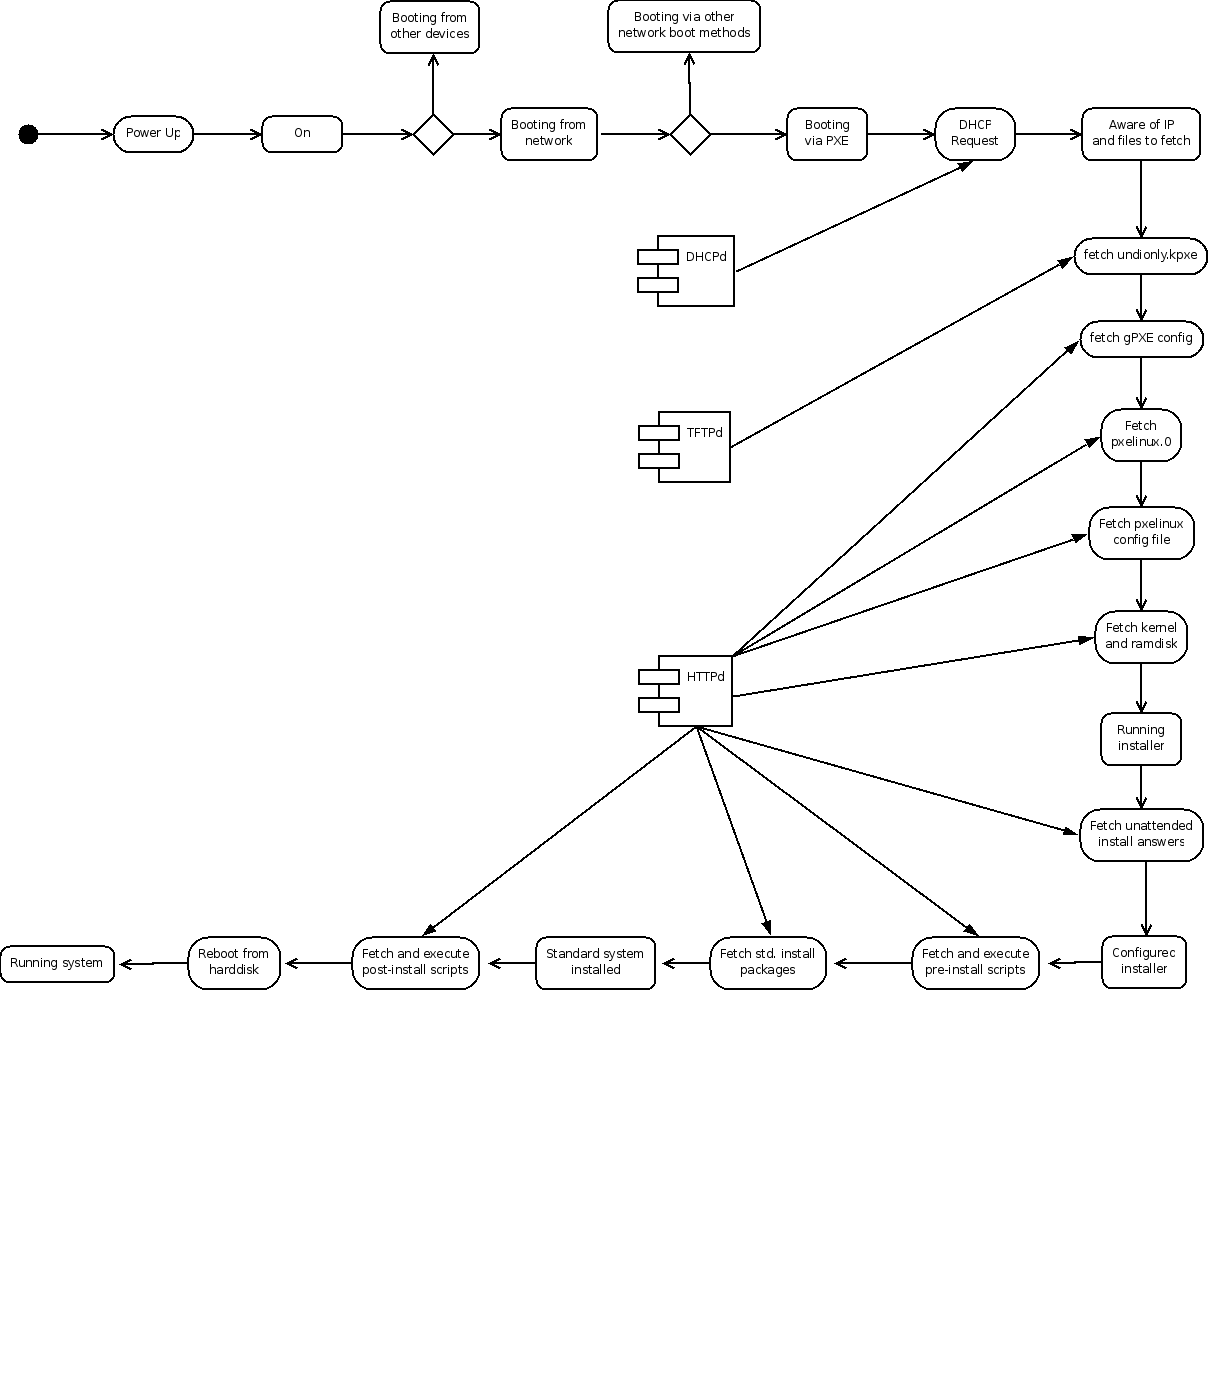 Flowchart describing booting a machine via the network the new way, via gPXE and then PXELinux